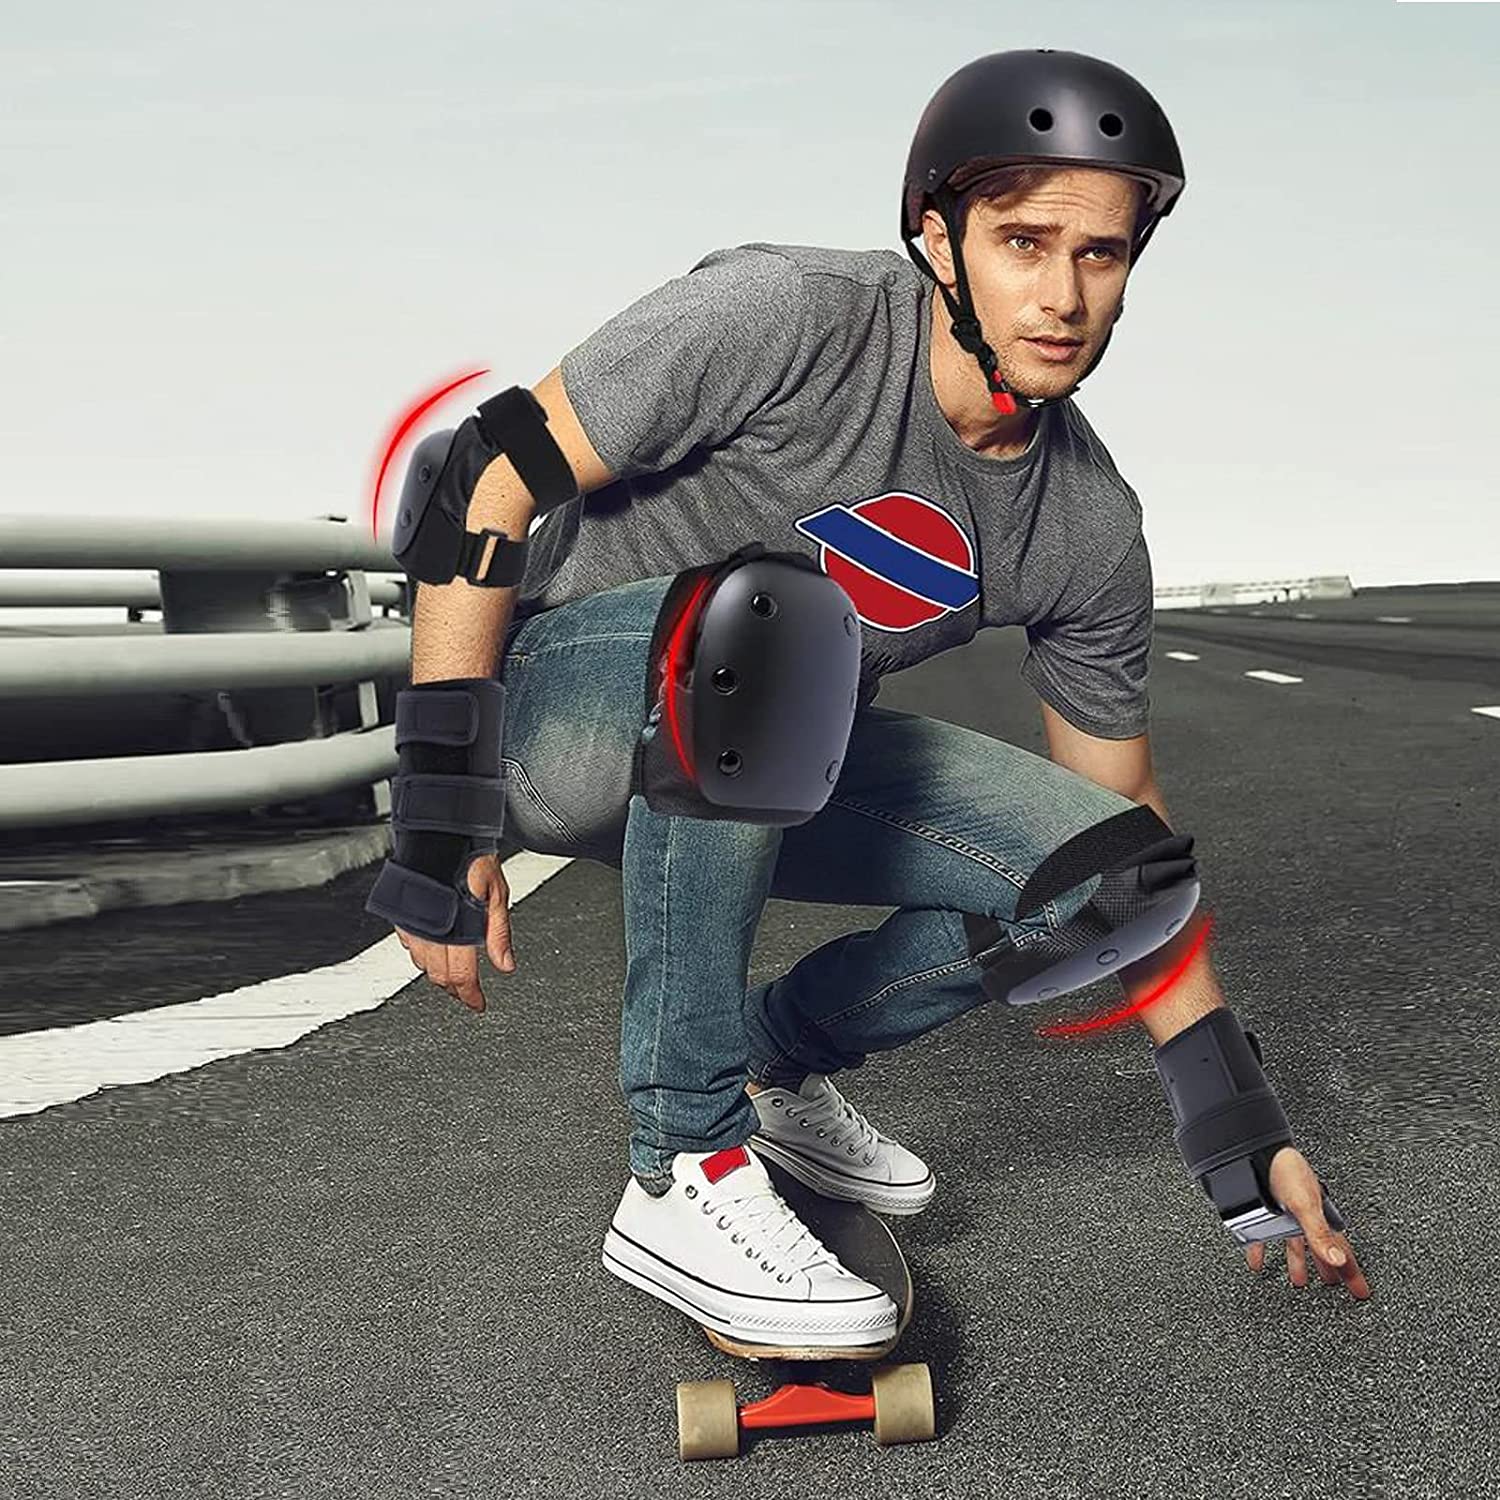 Safety gear for skateboarding — What to get and where to get it